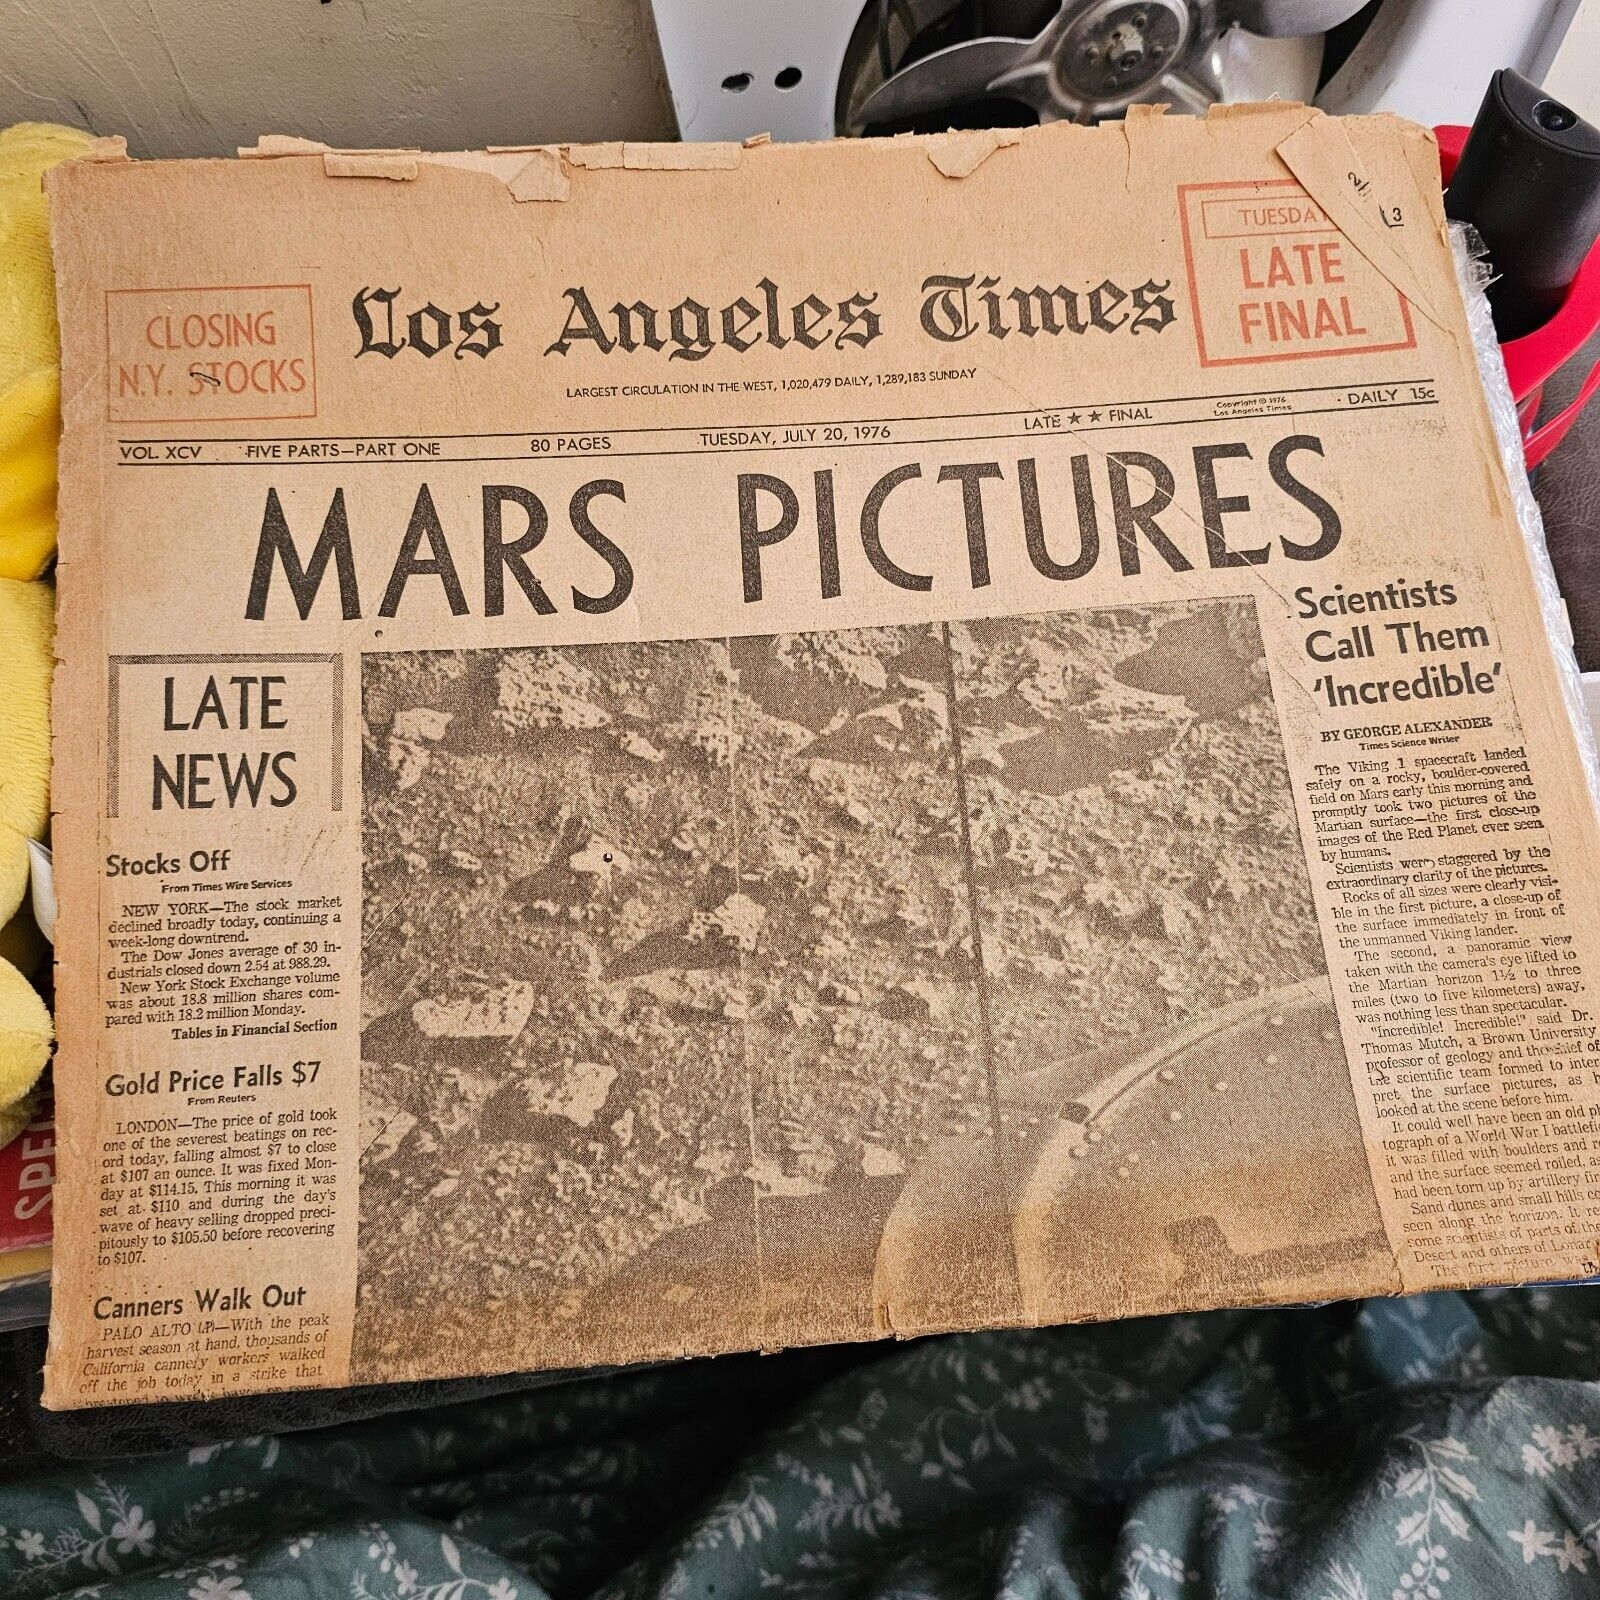 1976 MARS PICTURES ORIGINAL HEADLINE, JULY 20, LOS ANGELES TIMES, 20 PAGES